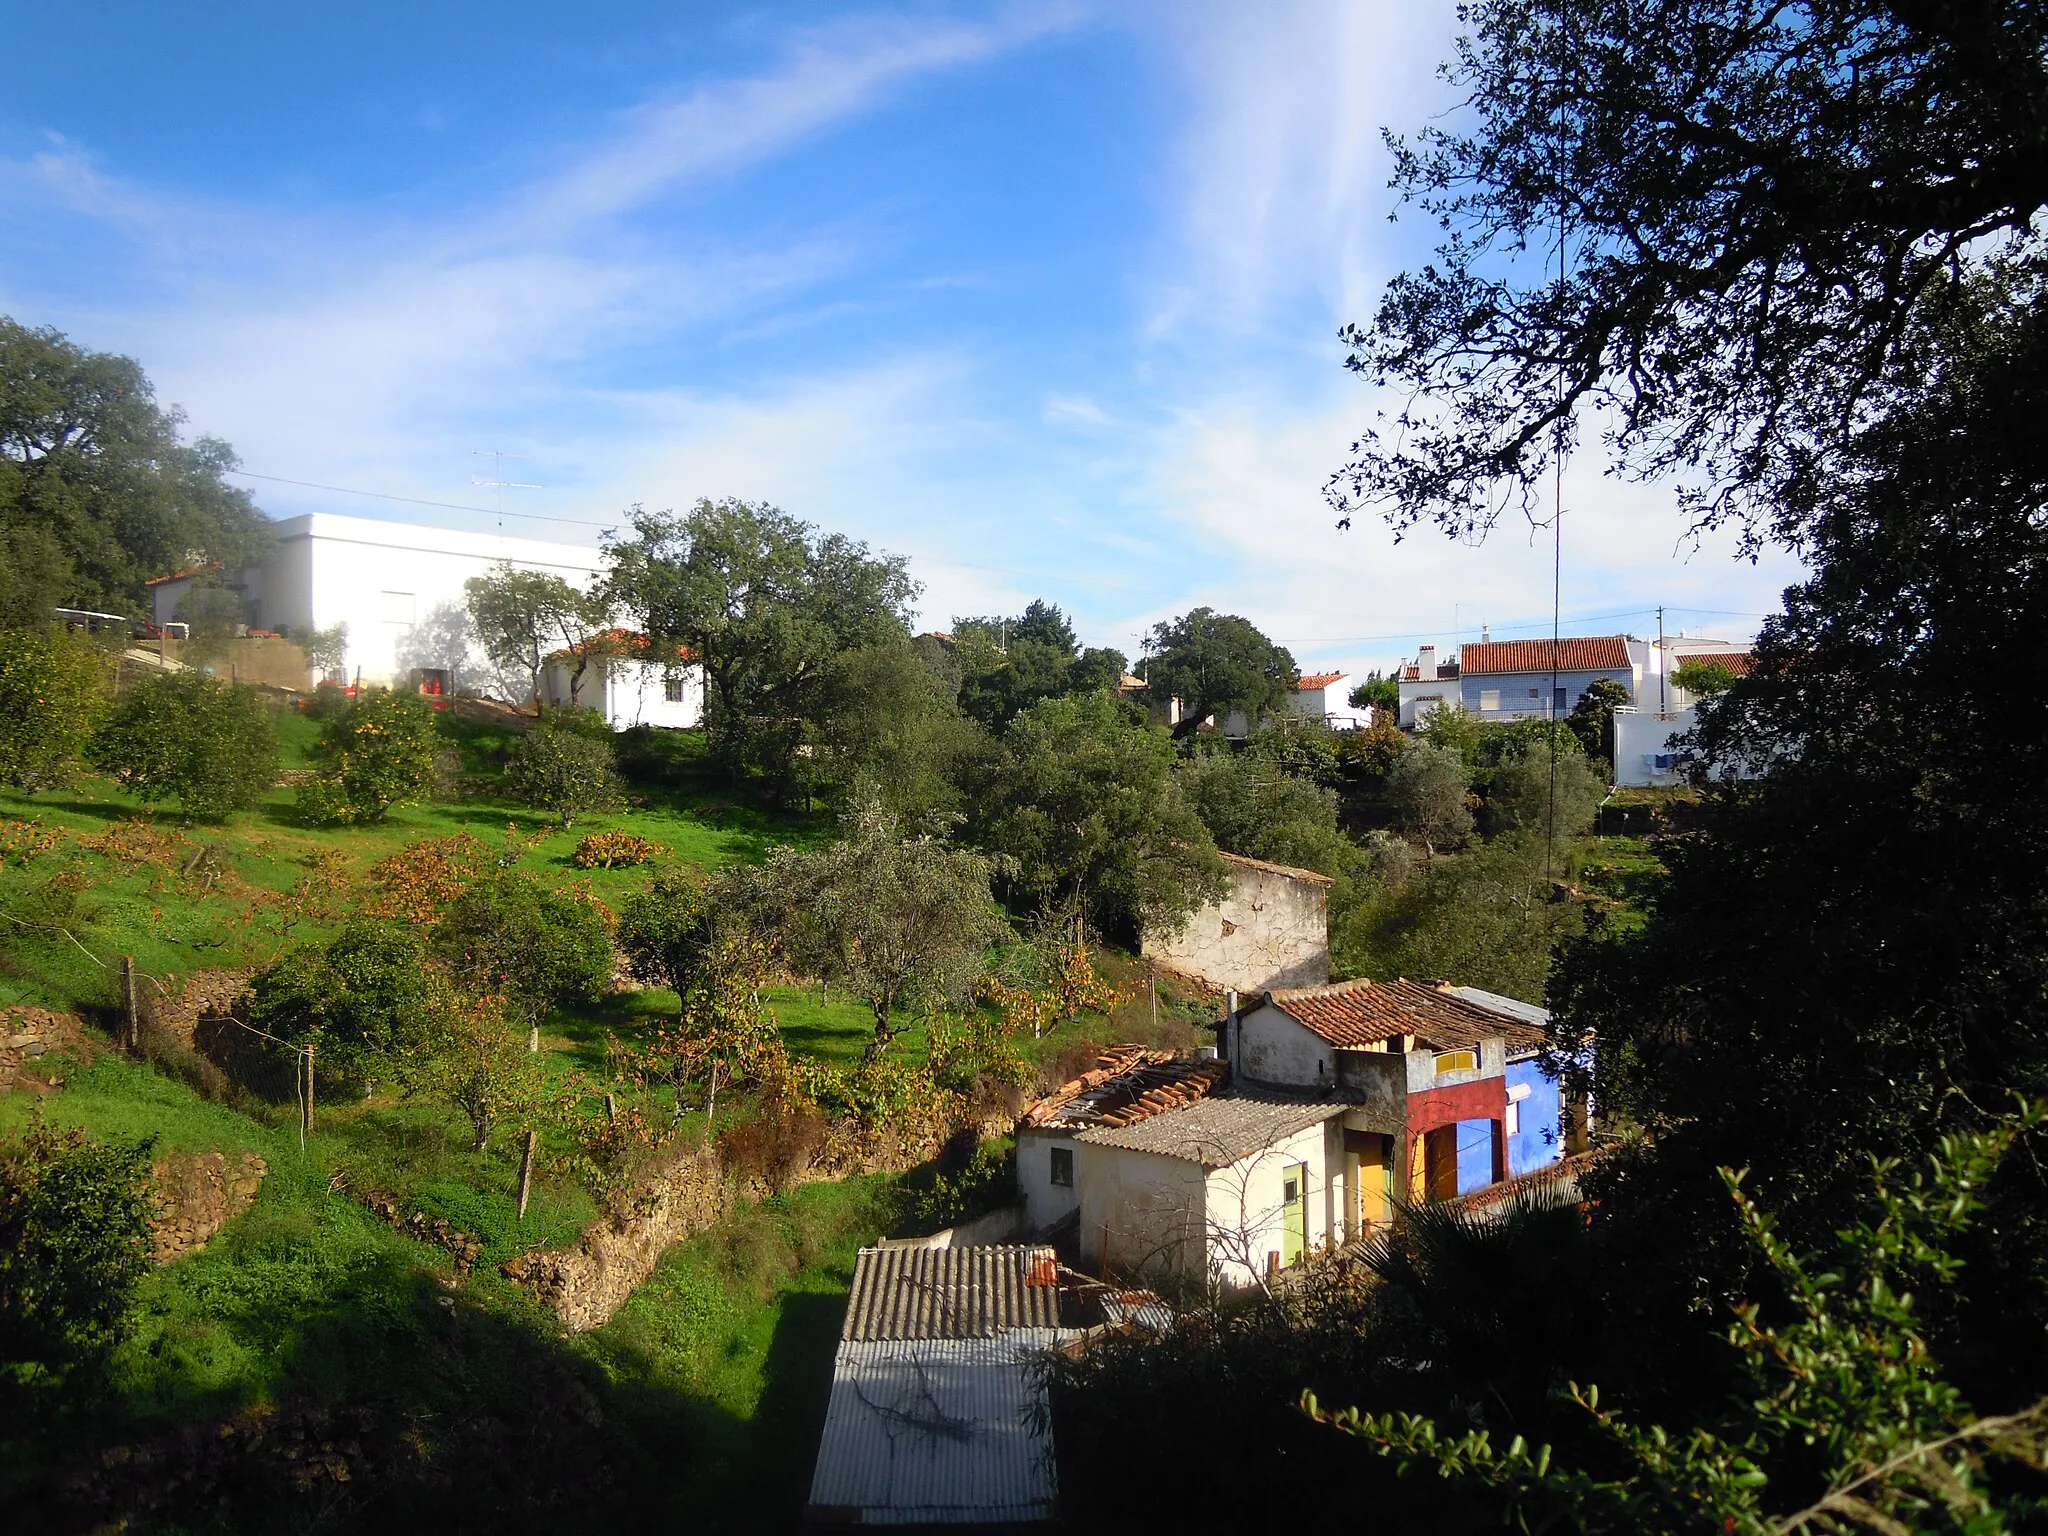 Photo showing: Buildings and gardens within the village of Montes Novos, Loulé, Algarve, Portugal.